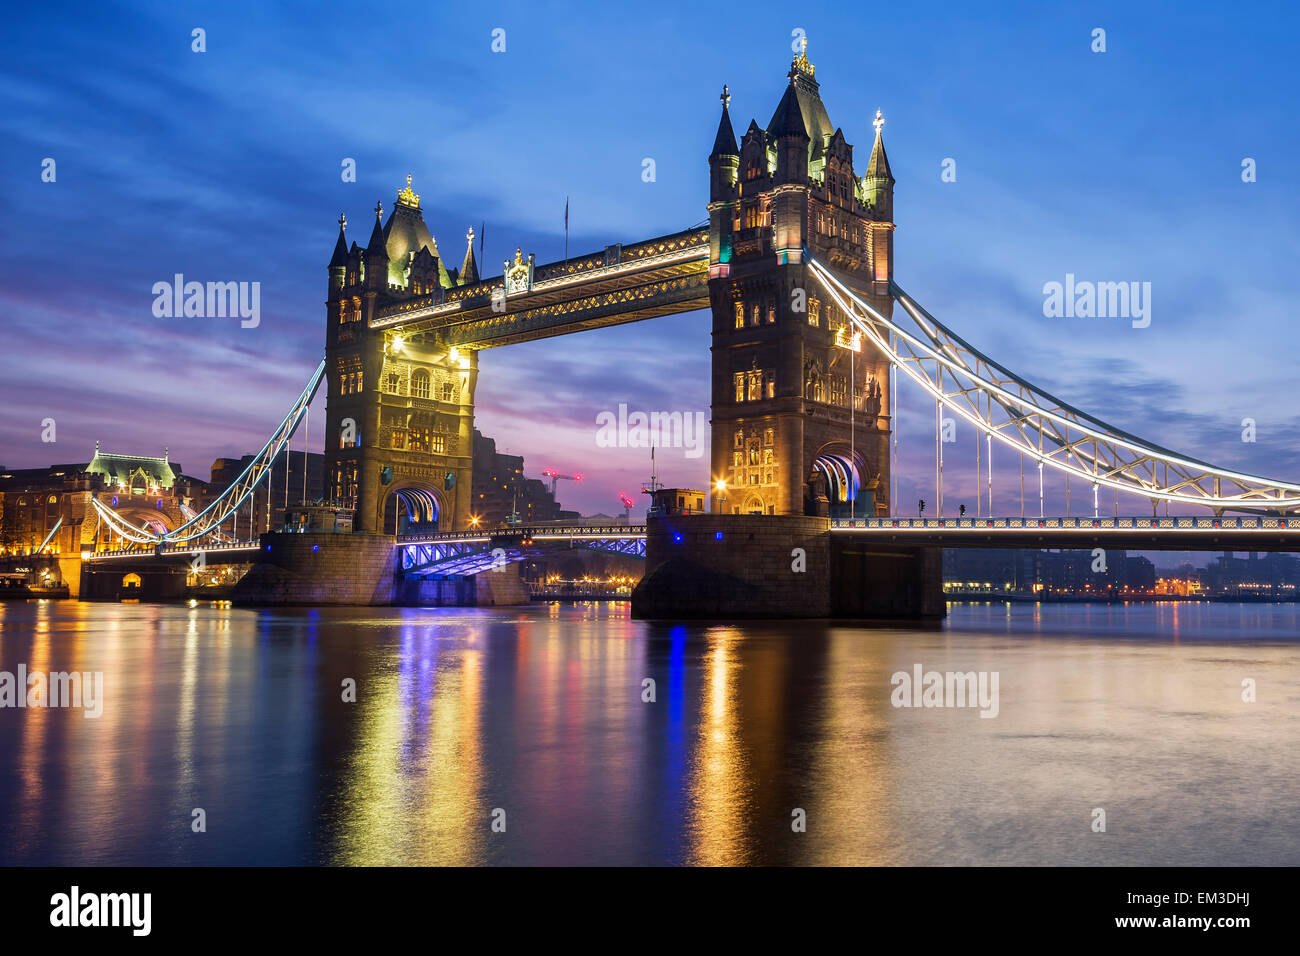 Famous Tower Bridge in the evening, London, England Stock Photo